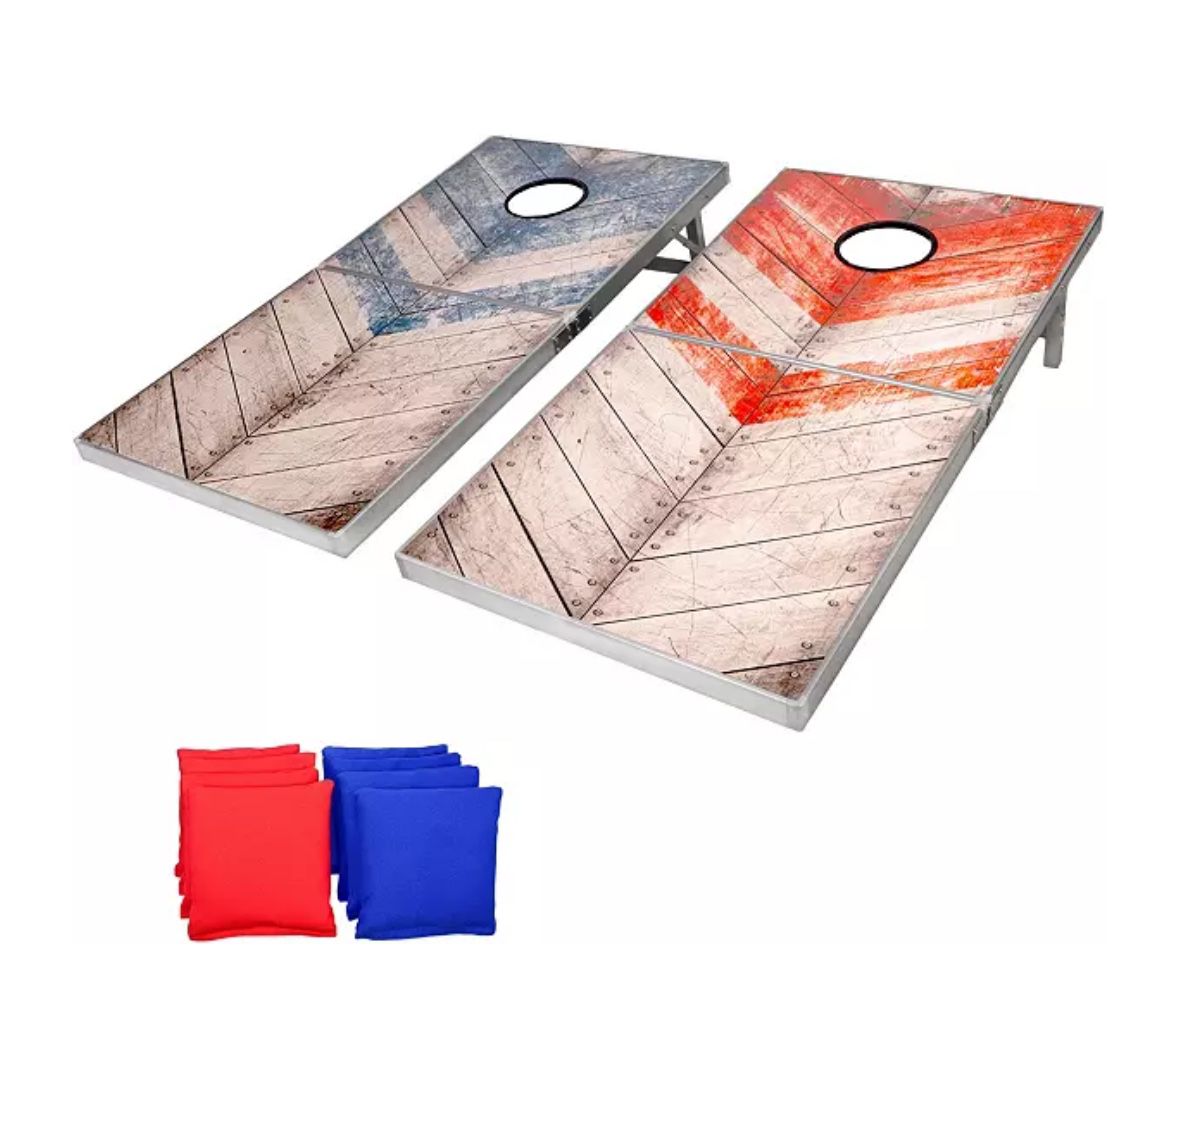 Brand New Cornhole Set - Boards And Bags - Foldable For Tailgating